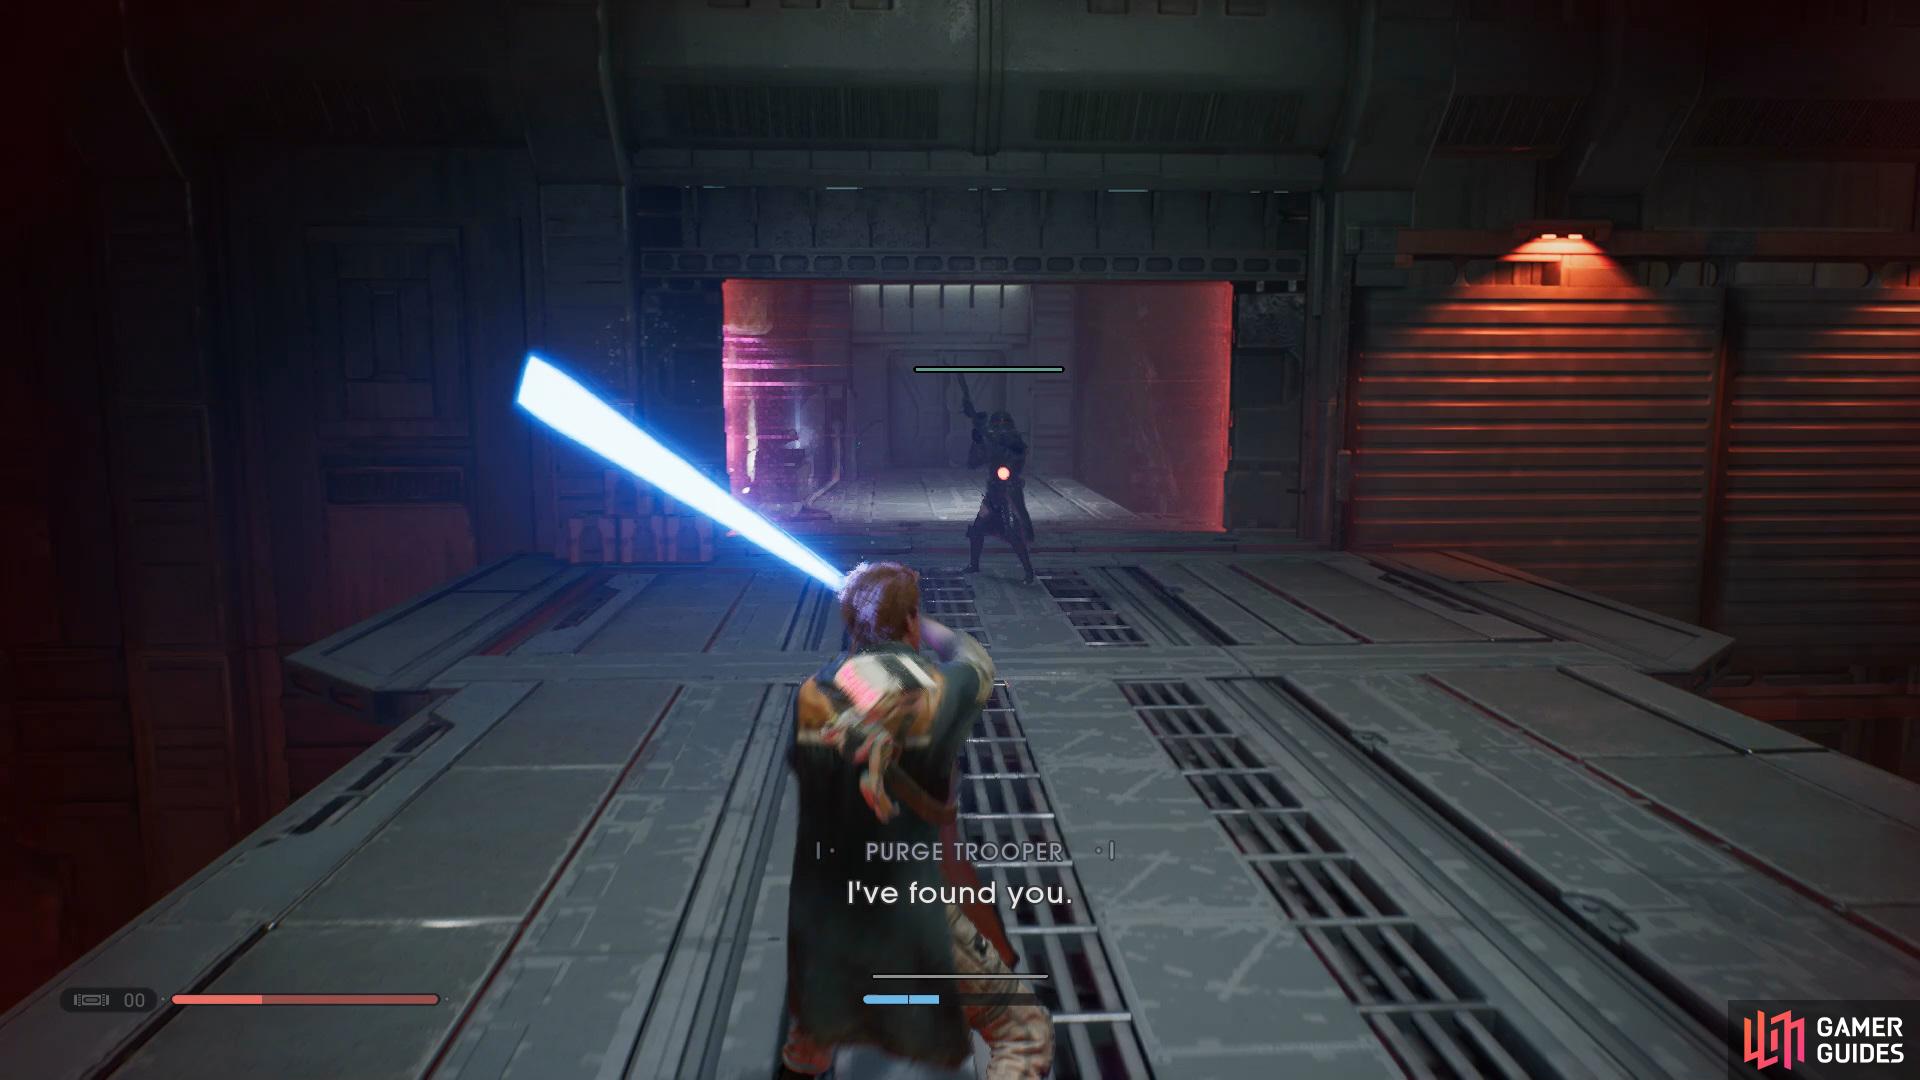 To take out the Purge Trooper, simply Force Push him off the side or use Force Slow and hit 2-3 times.